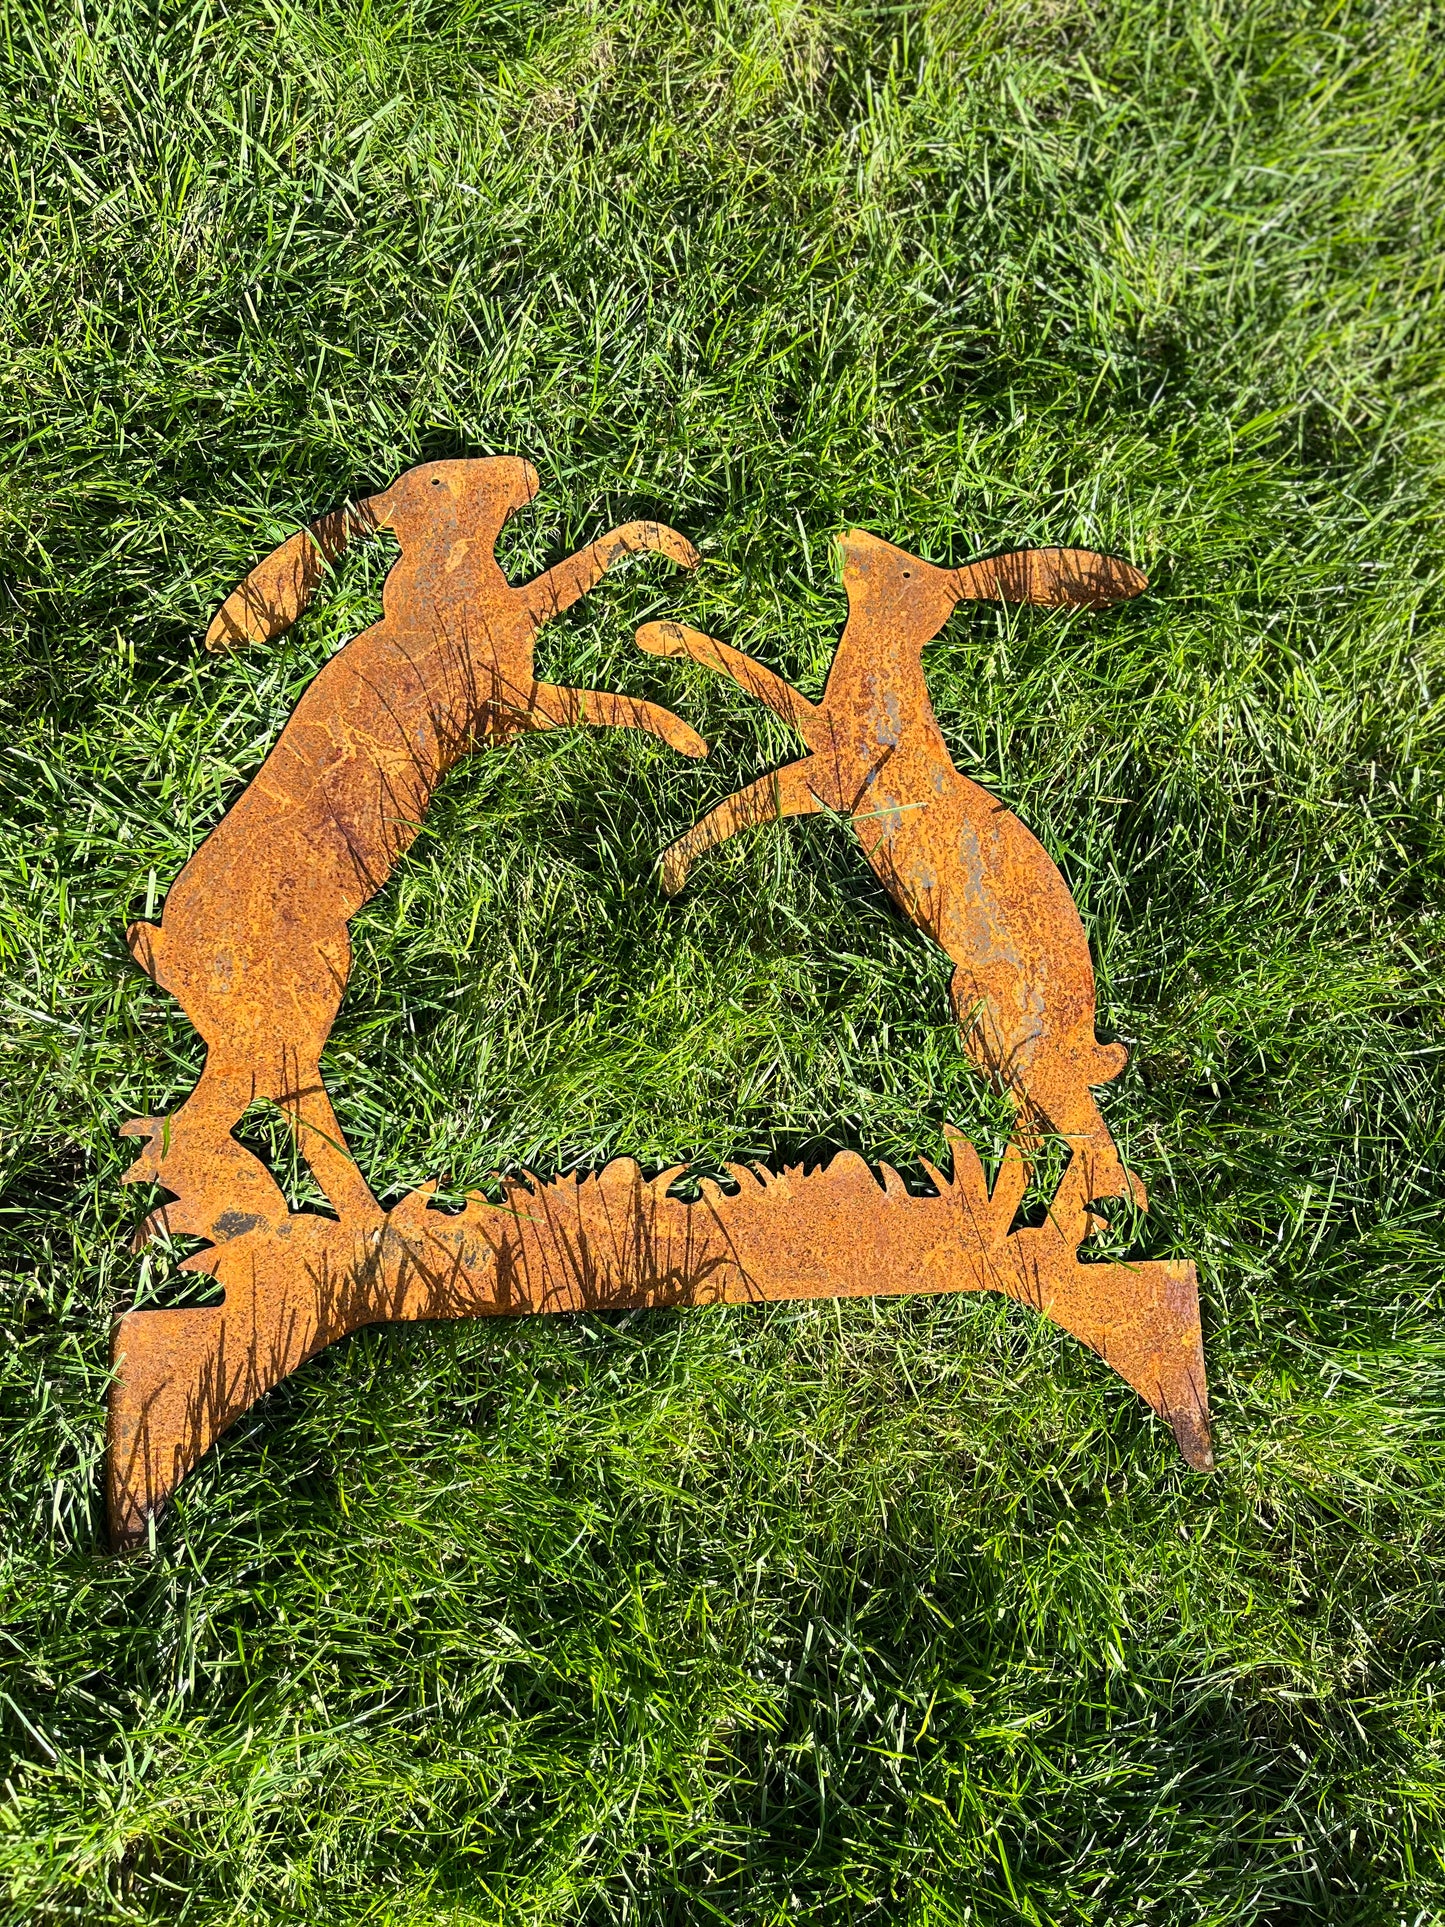 Boxing Hares | Hand Forged Boxing Hares | Rusty Boxing Hares | Garden Decor | Gift for a Friend